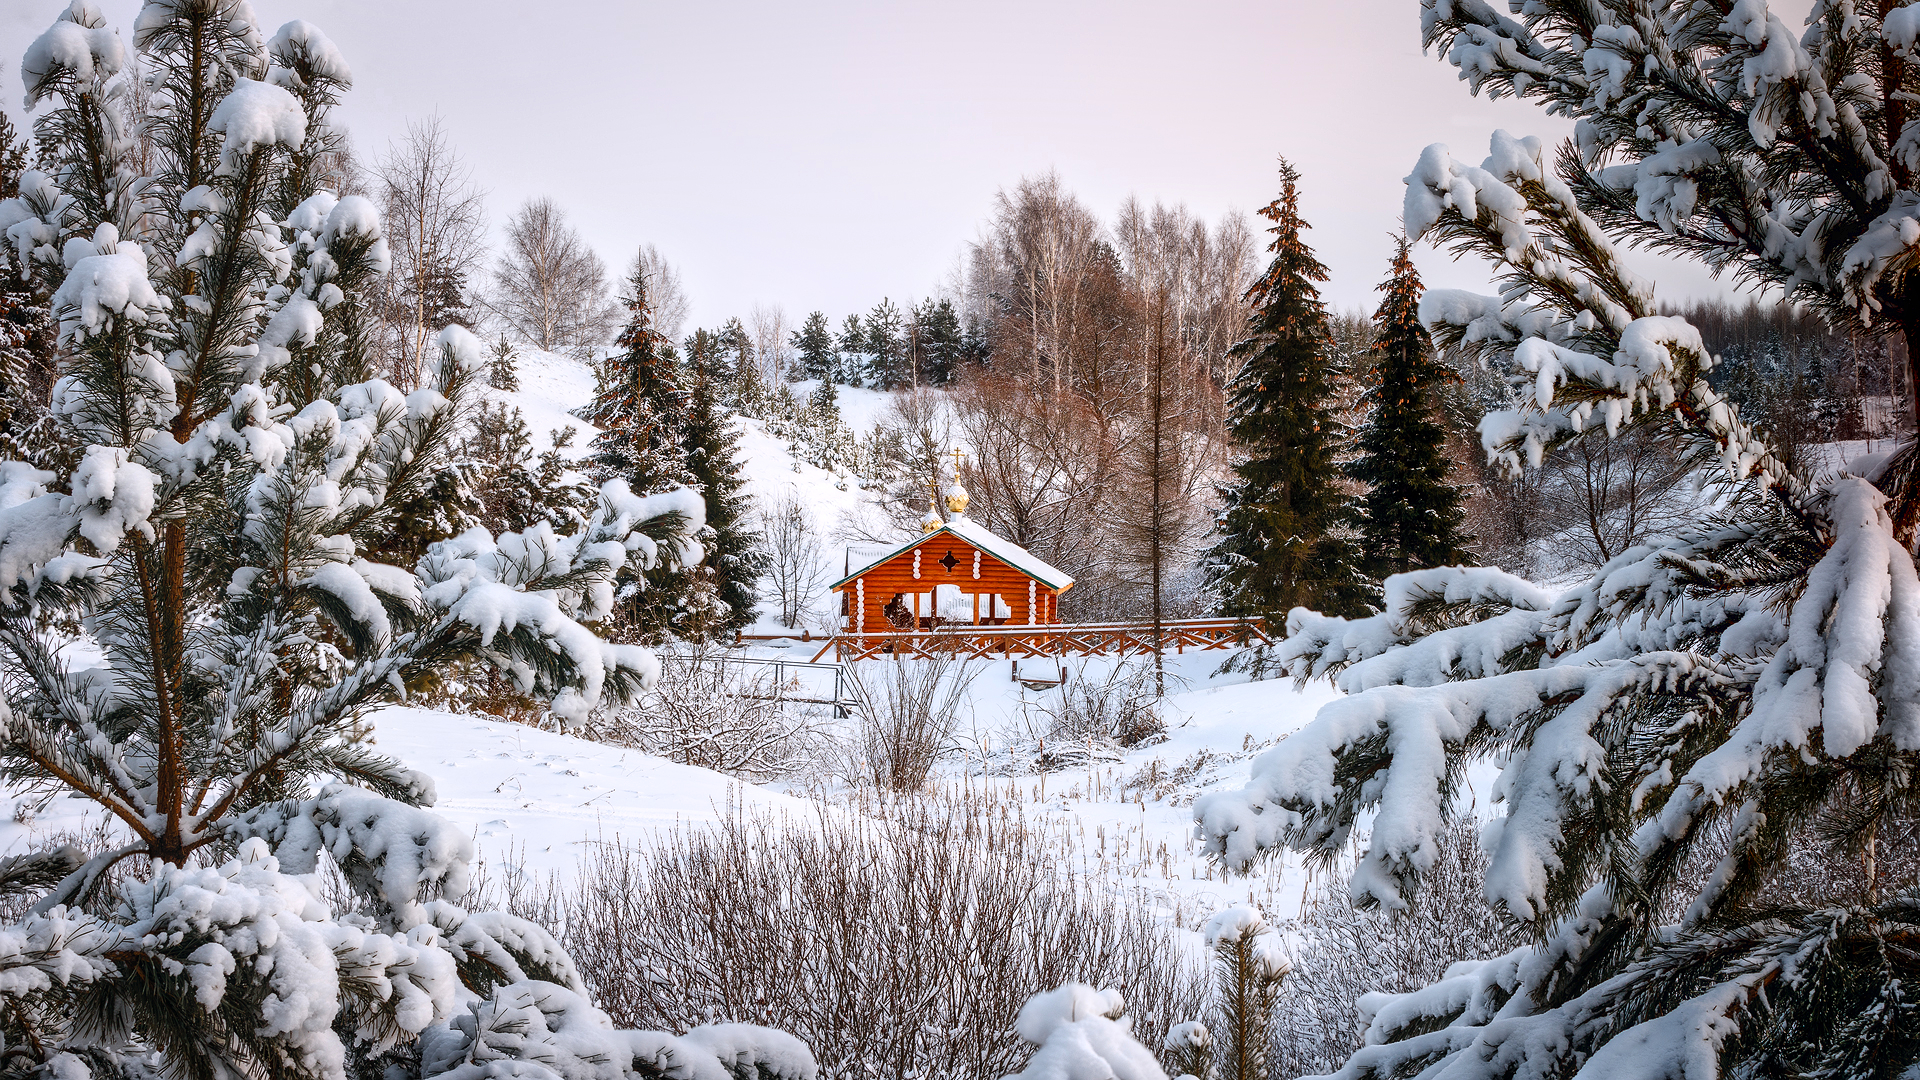 General 1920x1080 snow cabin bridge trees photography landscape winter outdoors nature barns